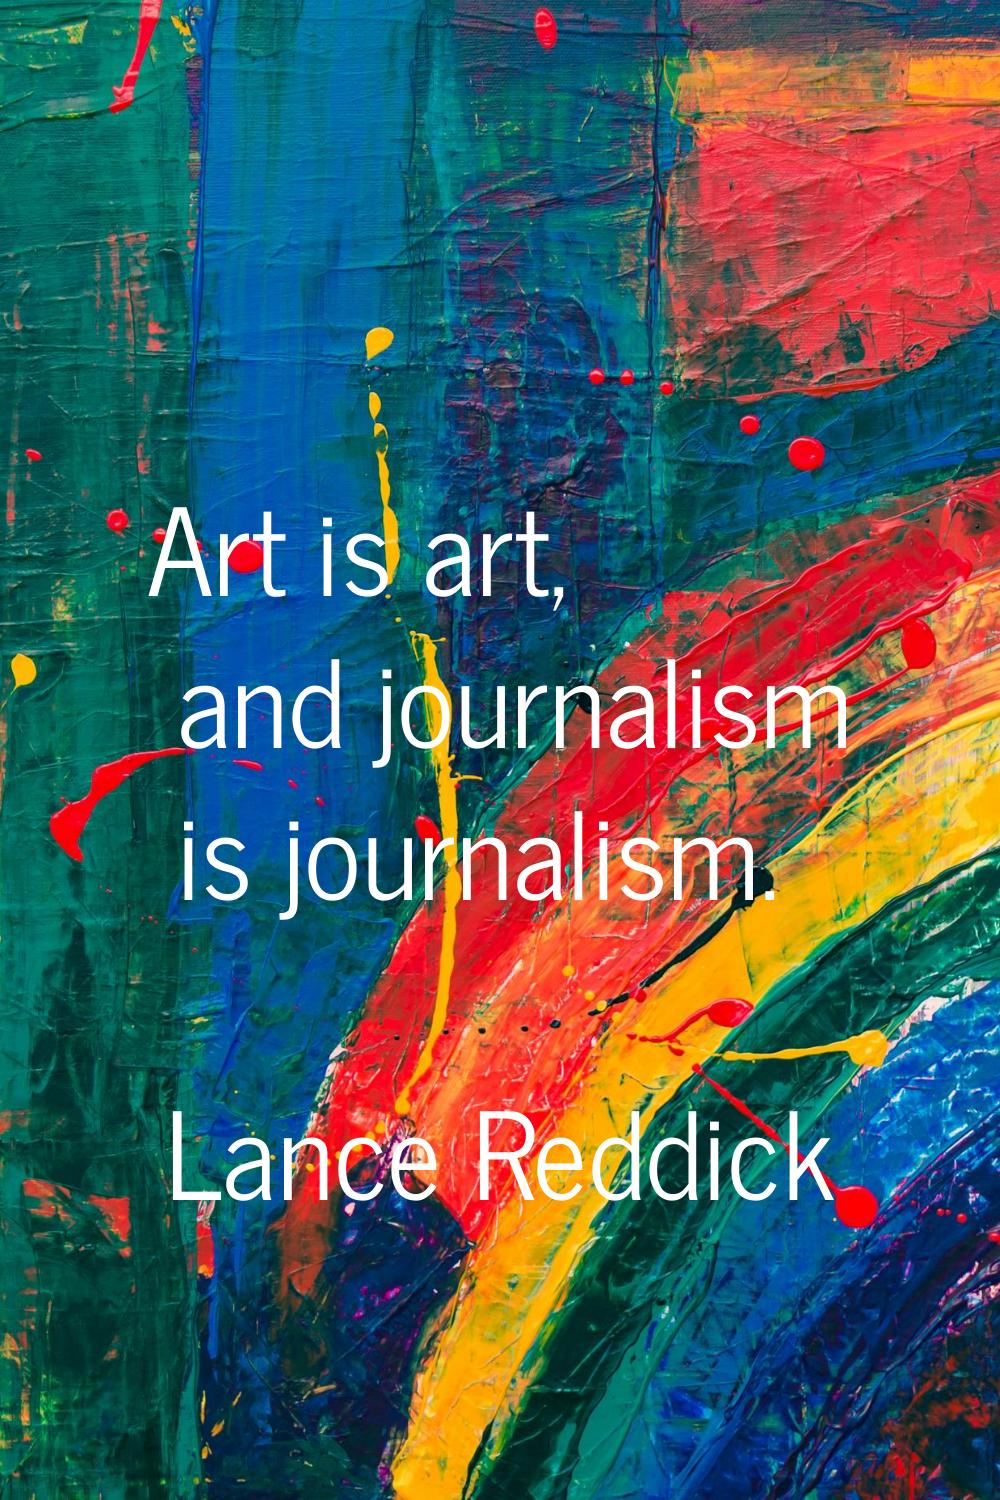 Art is art, and journalism is journalism.